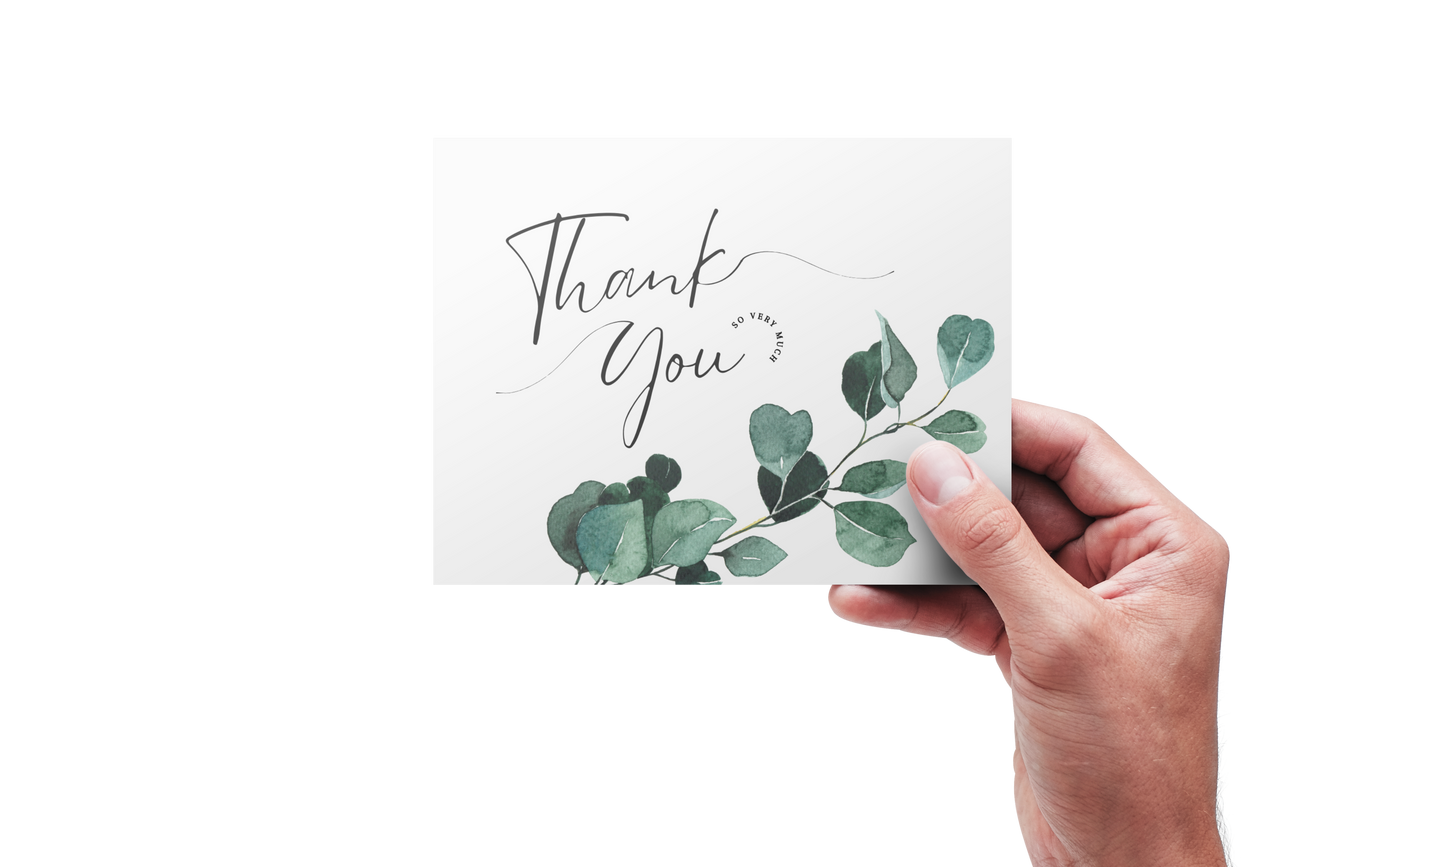 Thank You Cards | Pack of 10